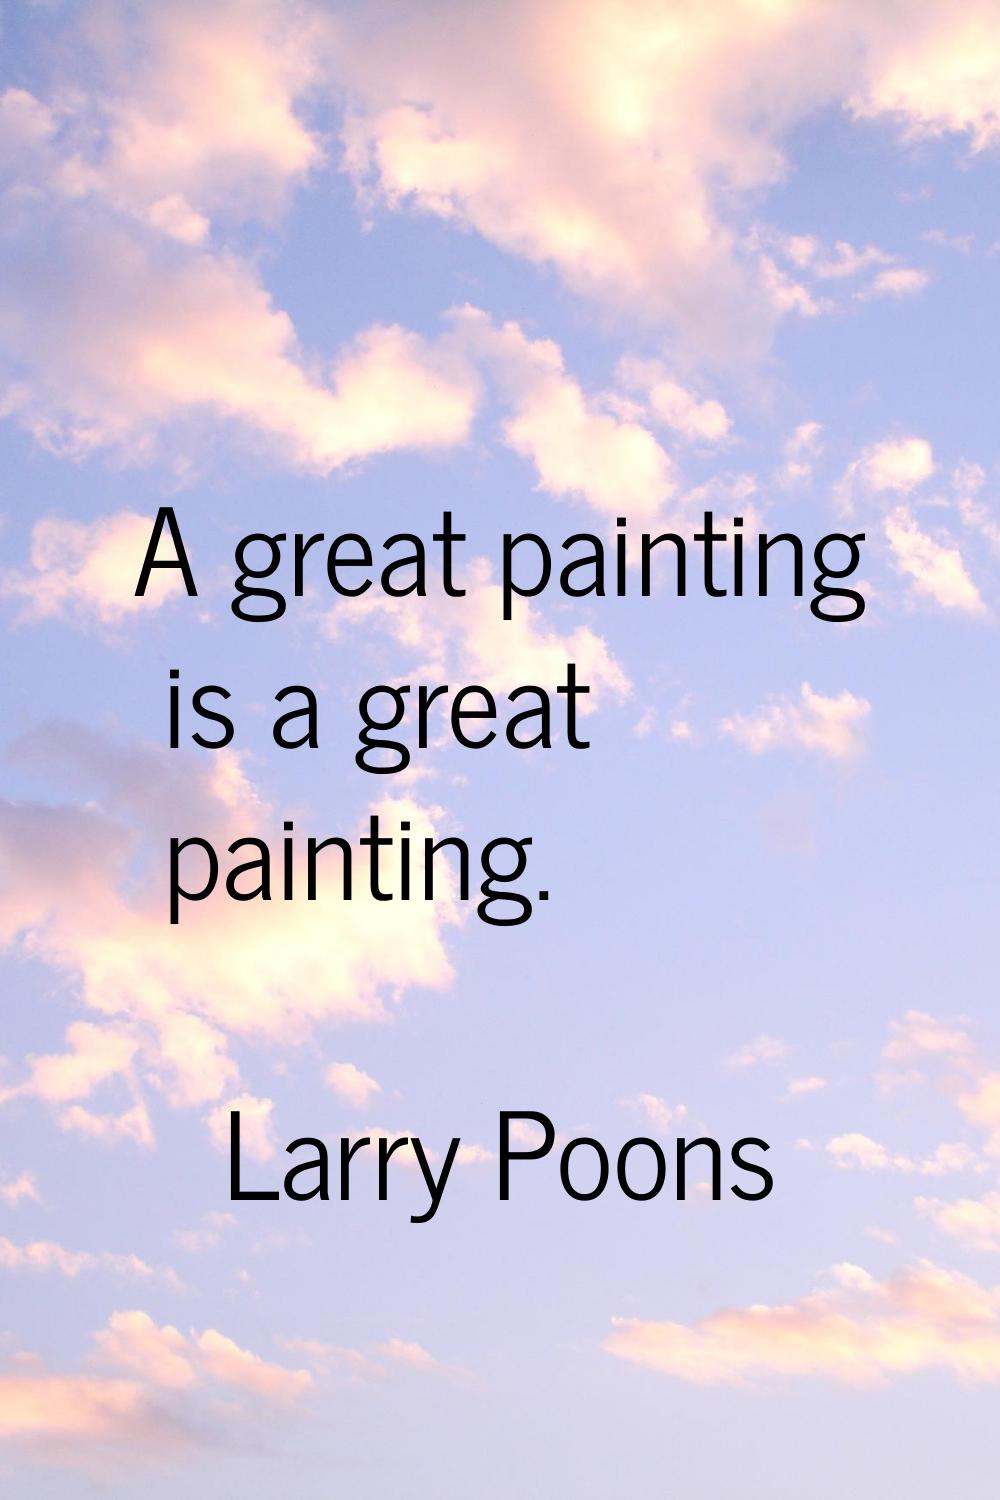 A great painting is a great painting.